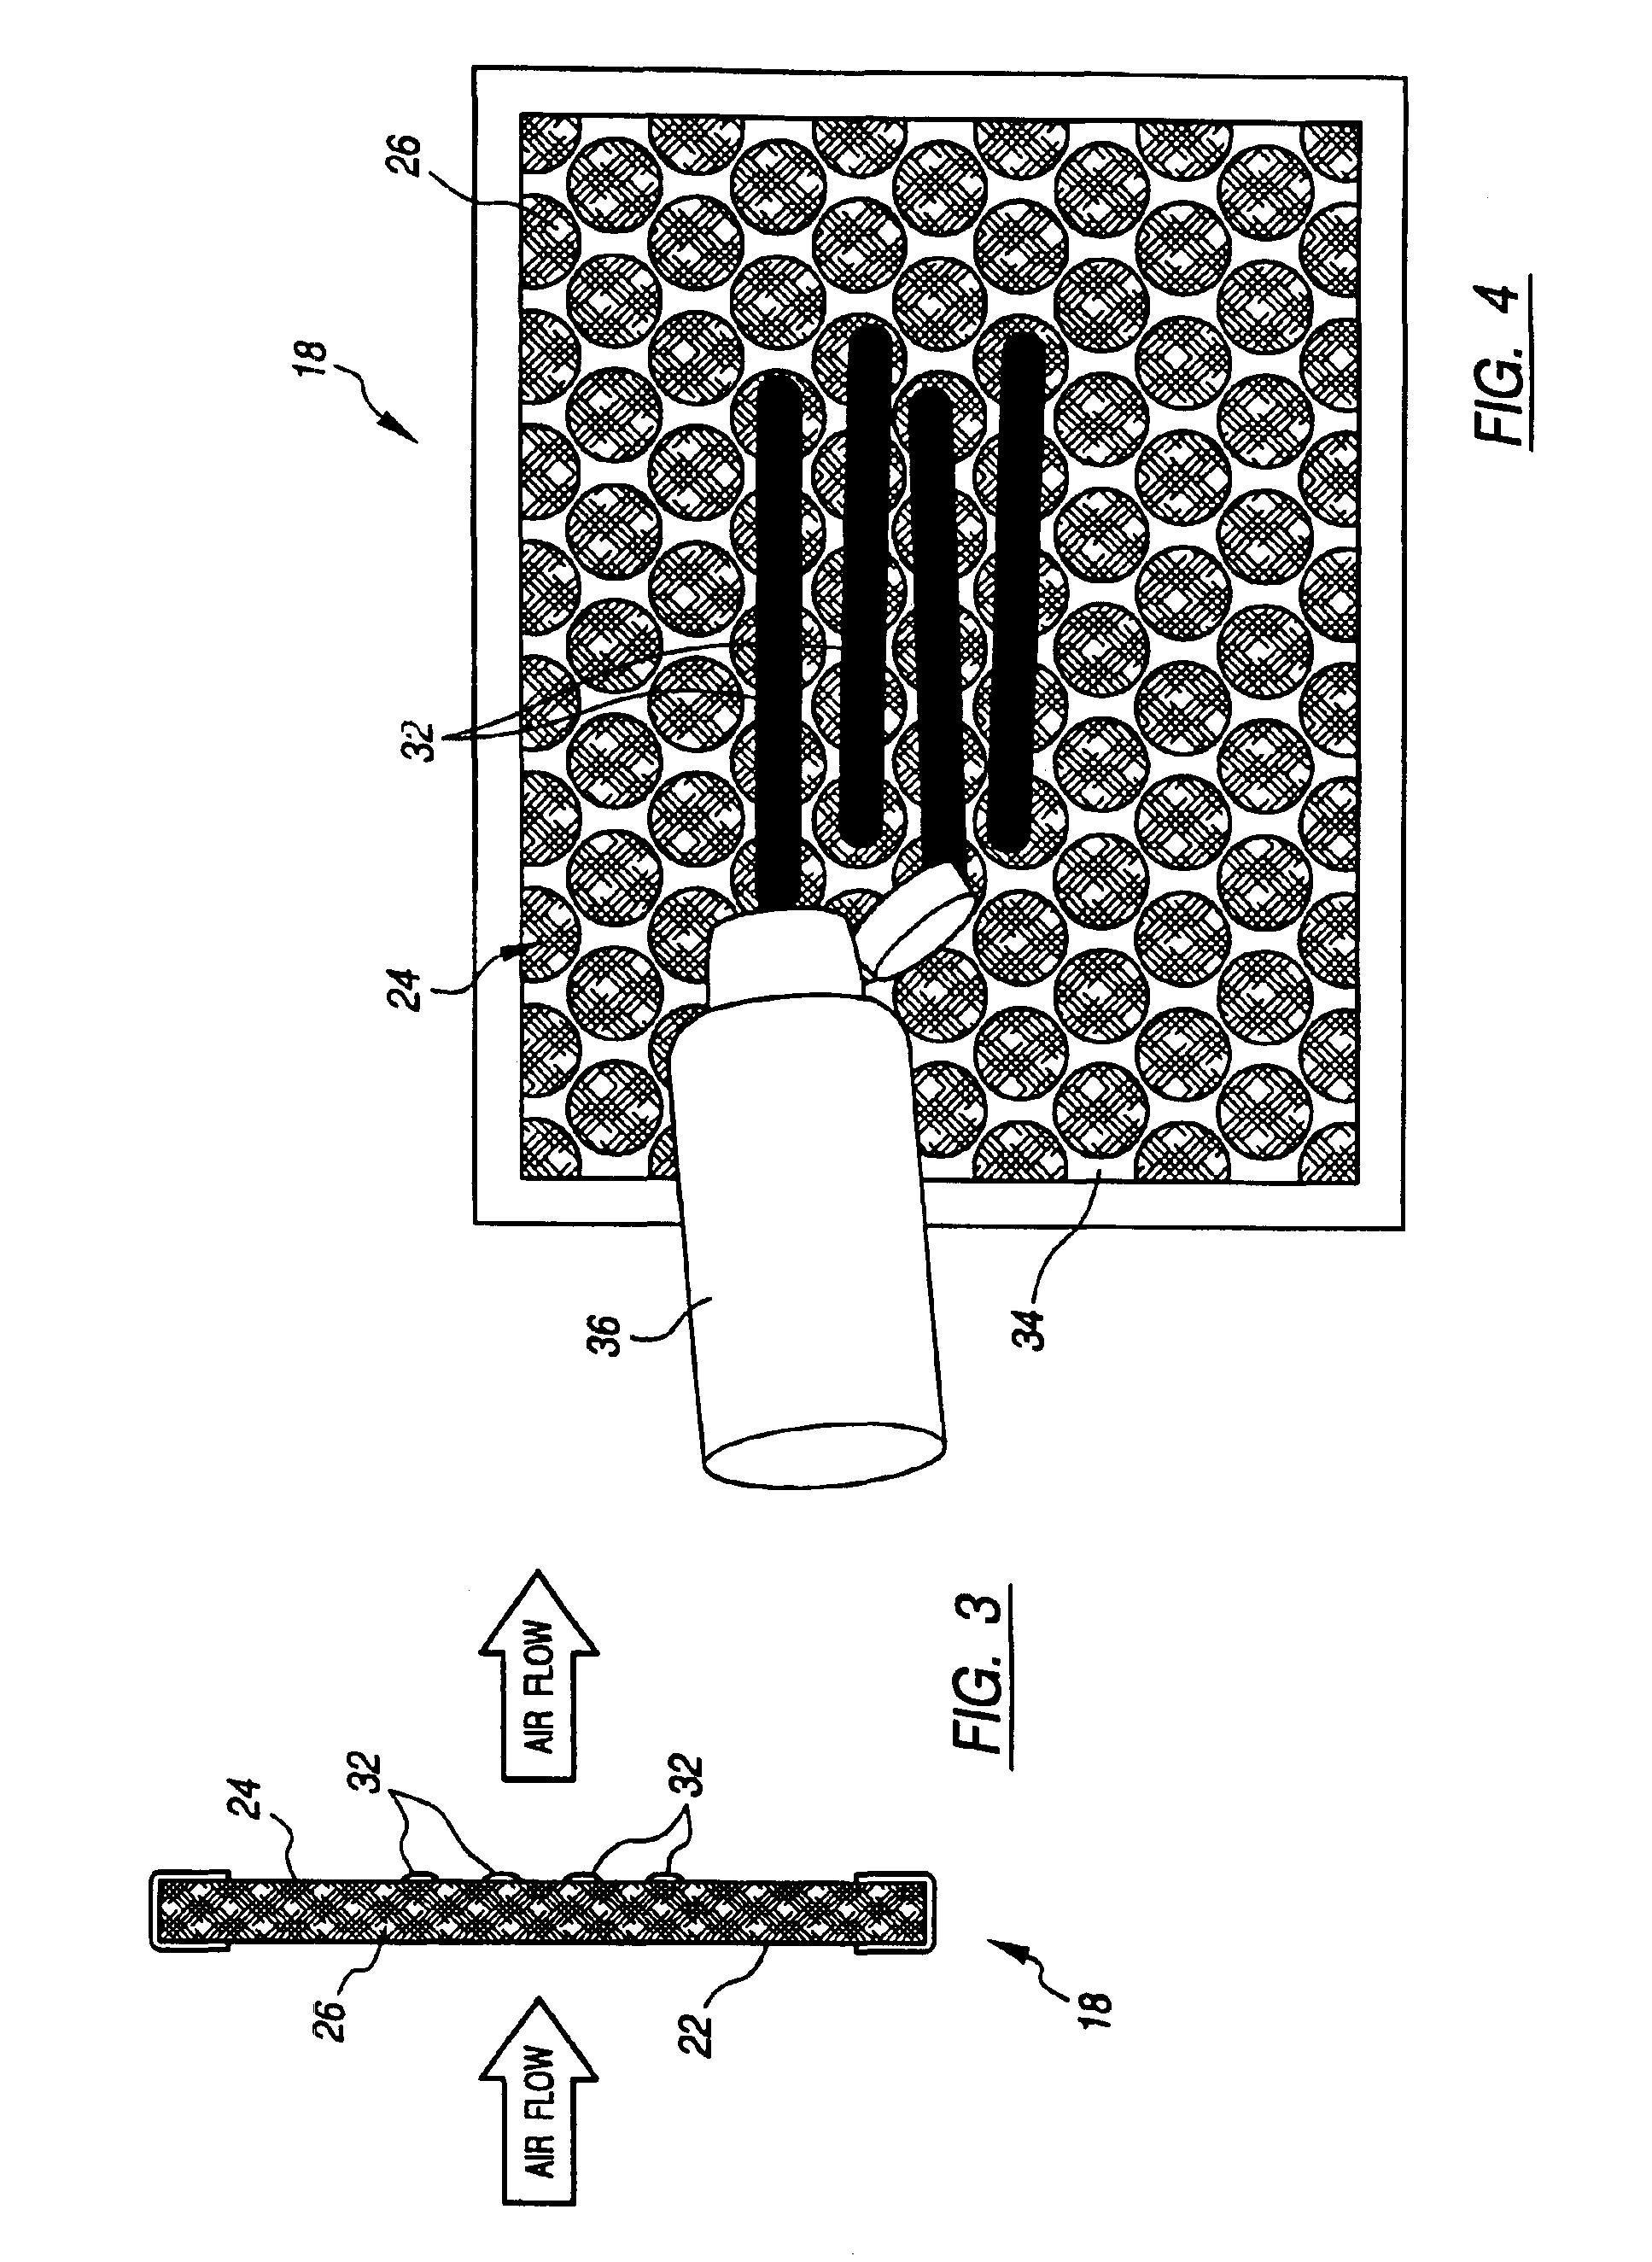 Air scenting compositions and processes for use thereof in air scenting devices